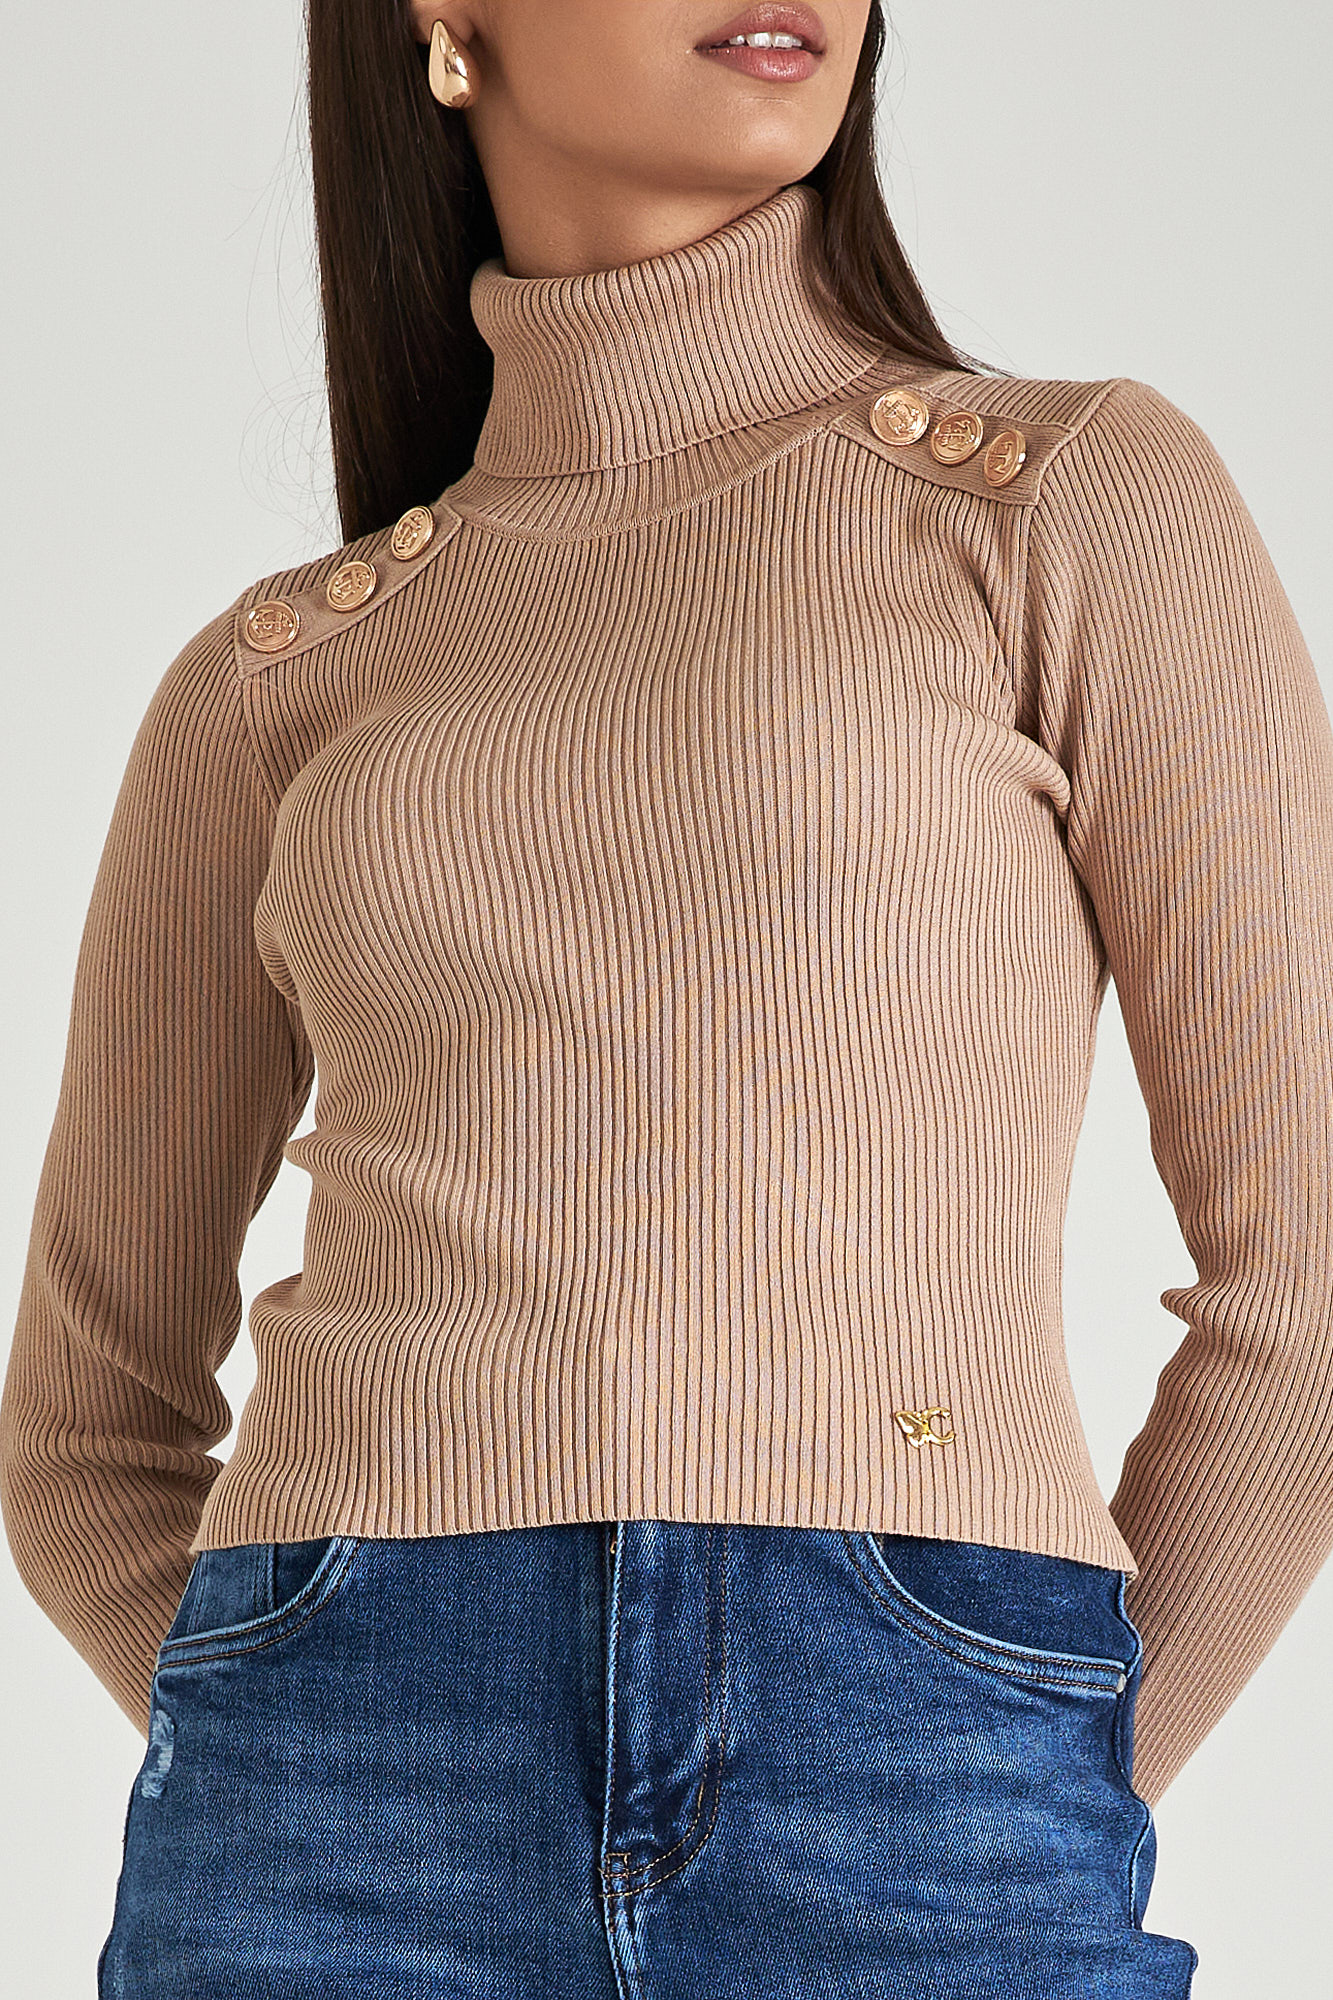 Picture of Rip sweater with gold buttons